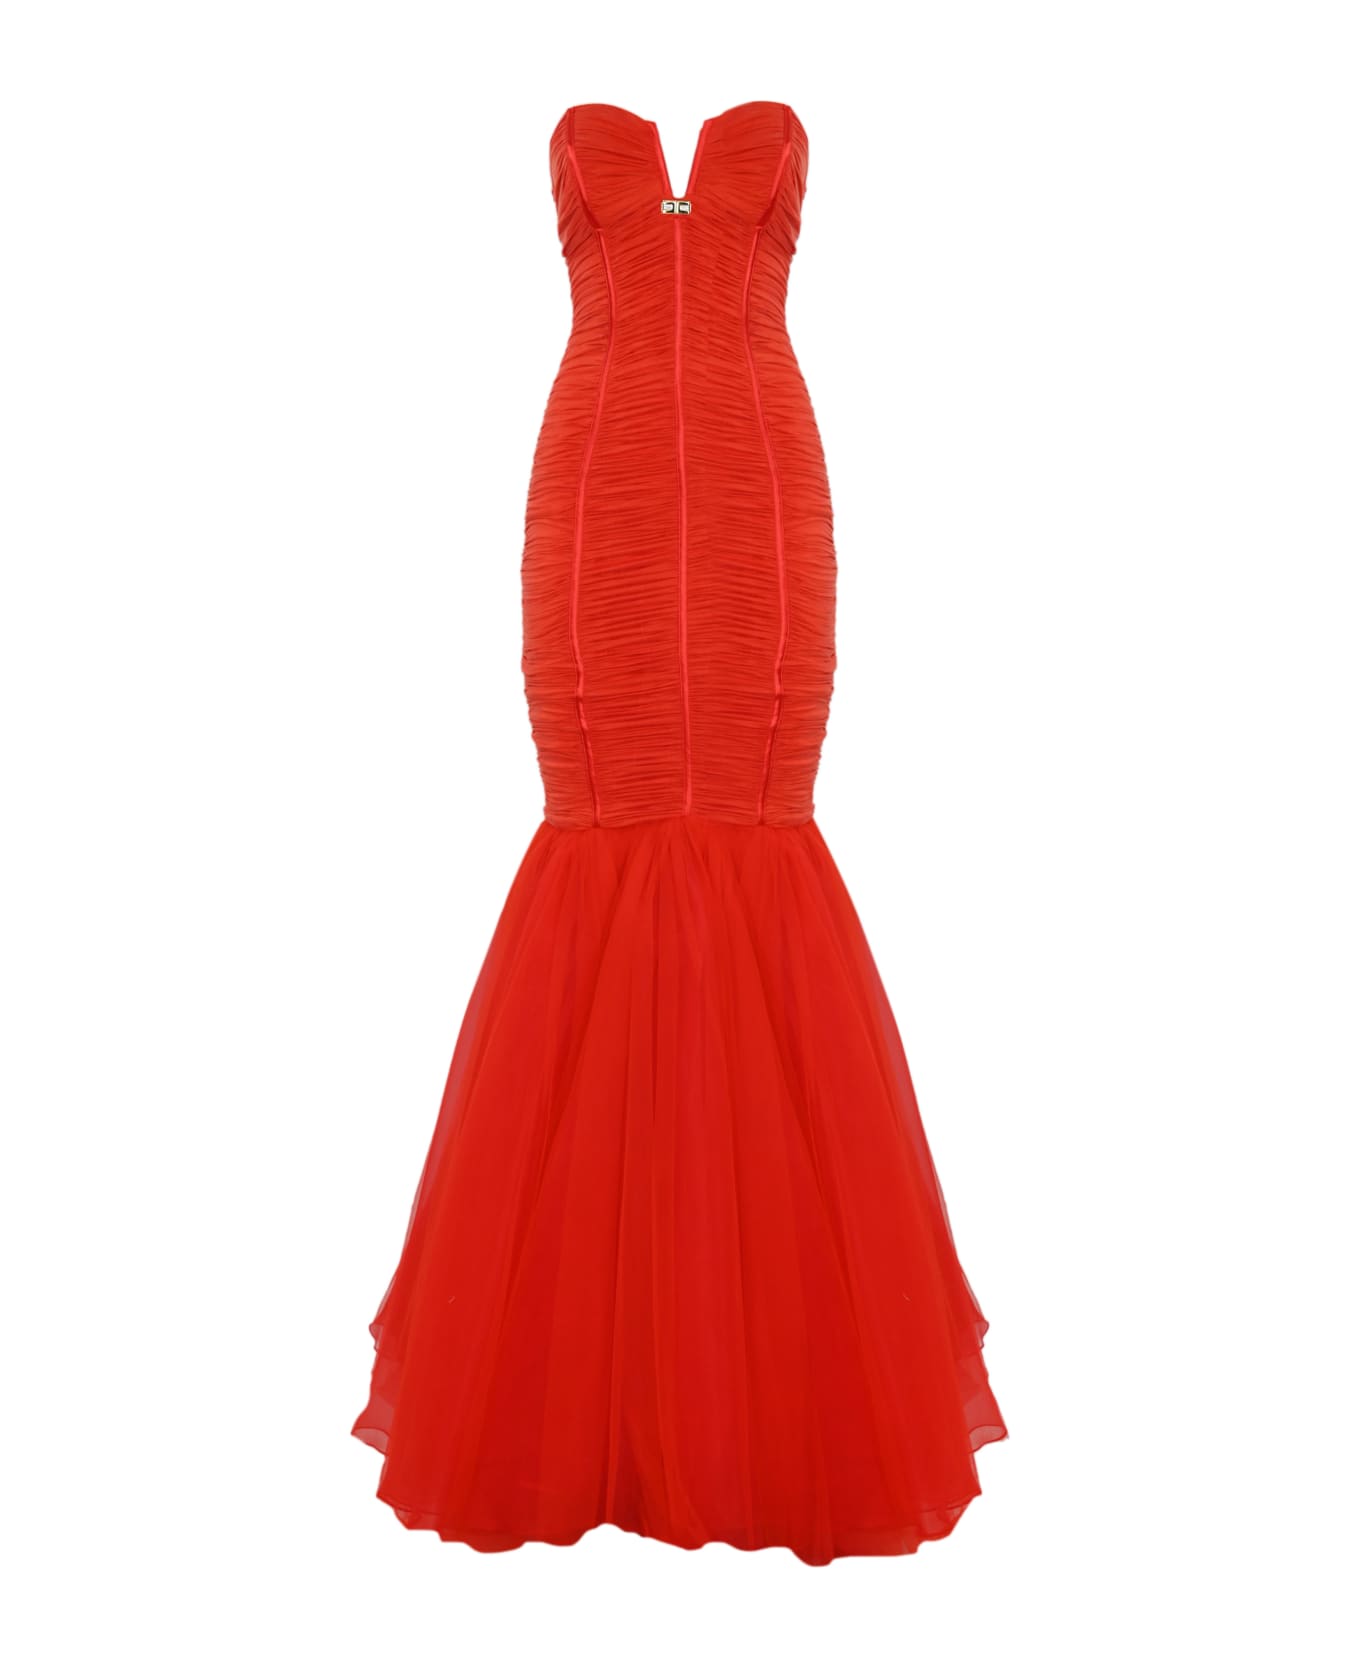 Elisabetta Franchi Red Carpet Dress In Jersey And Tulle - Corallo